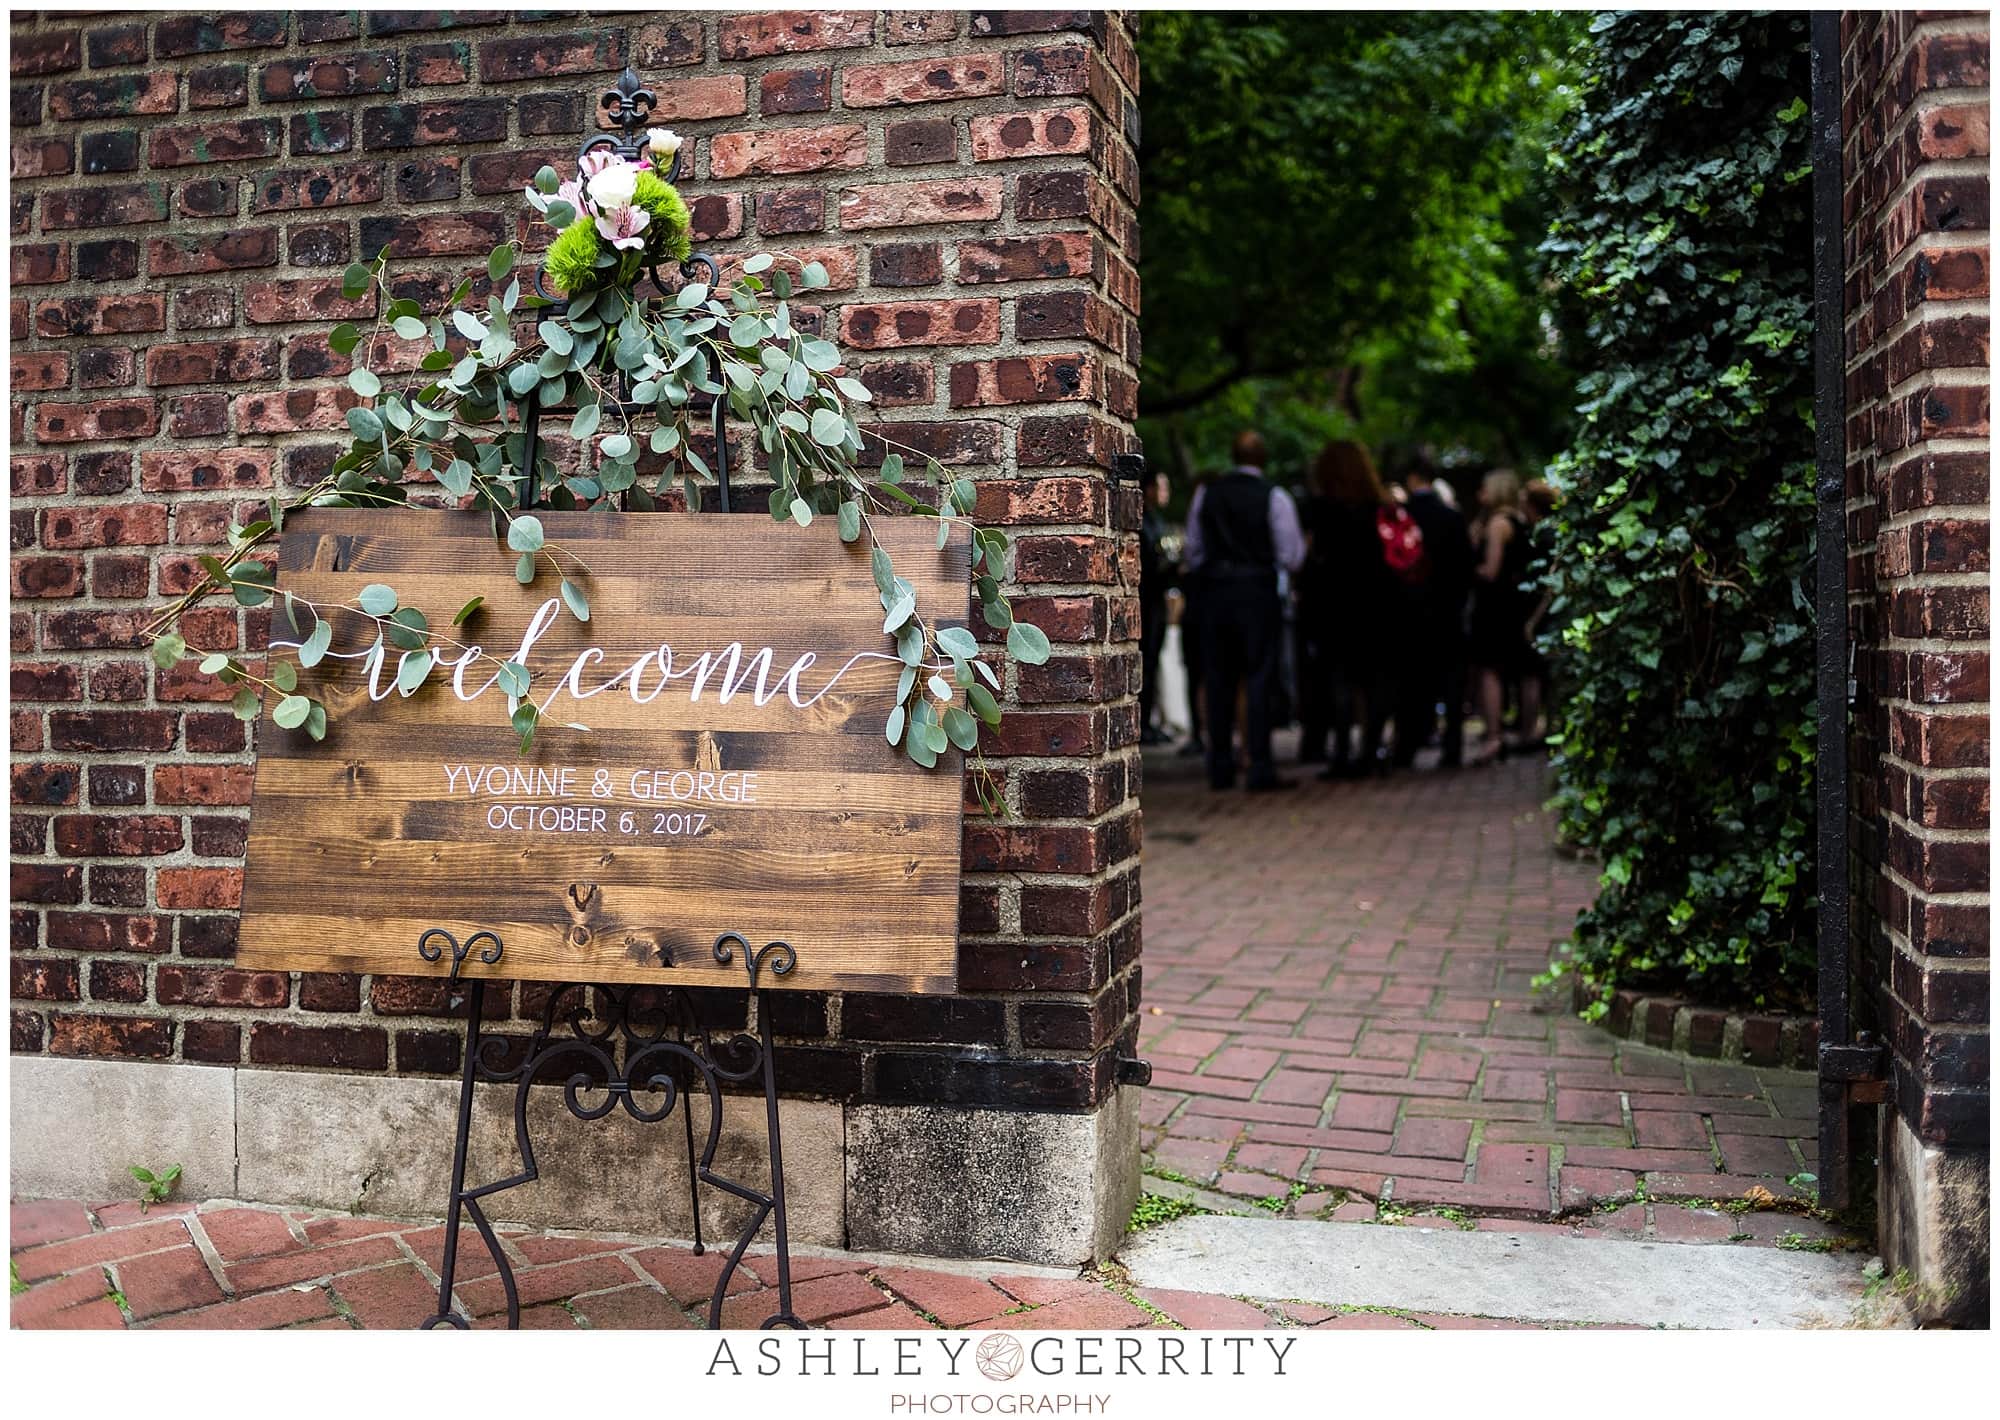 Wooden hand-painted welcome sign was draped with greenery and florals to welcome guests to this Colonial Dames wedding.